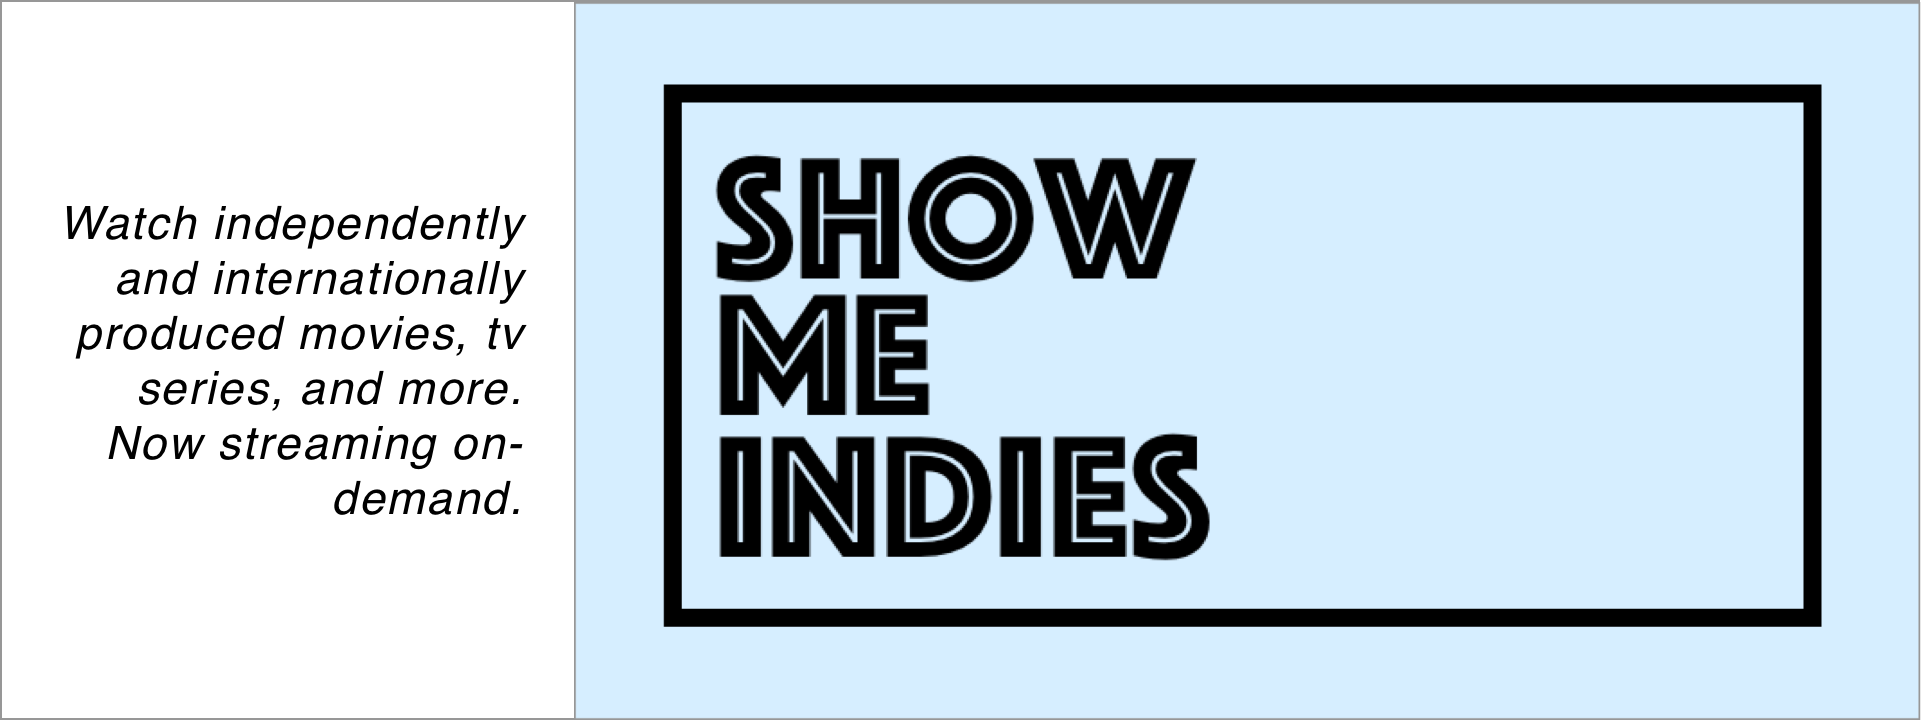 Show Me Indies Featured Image